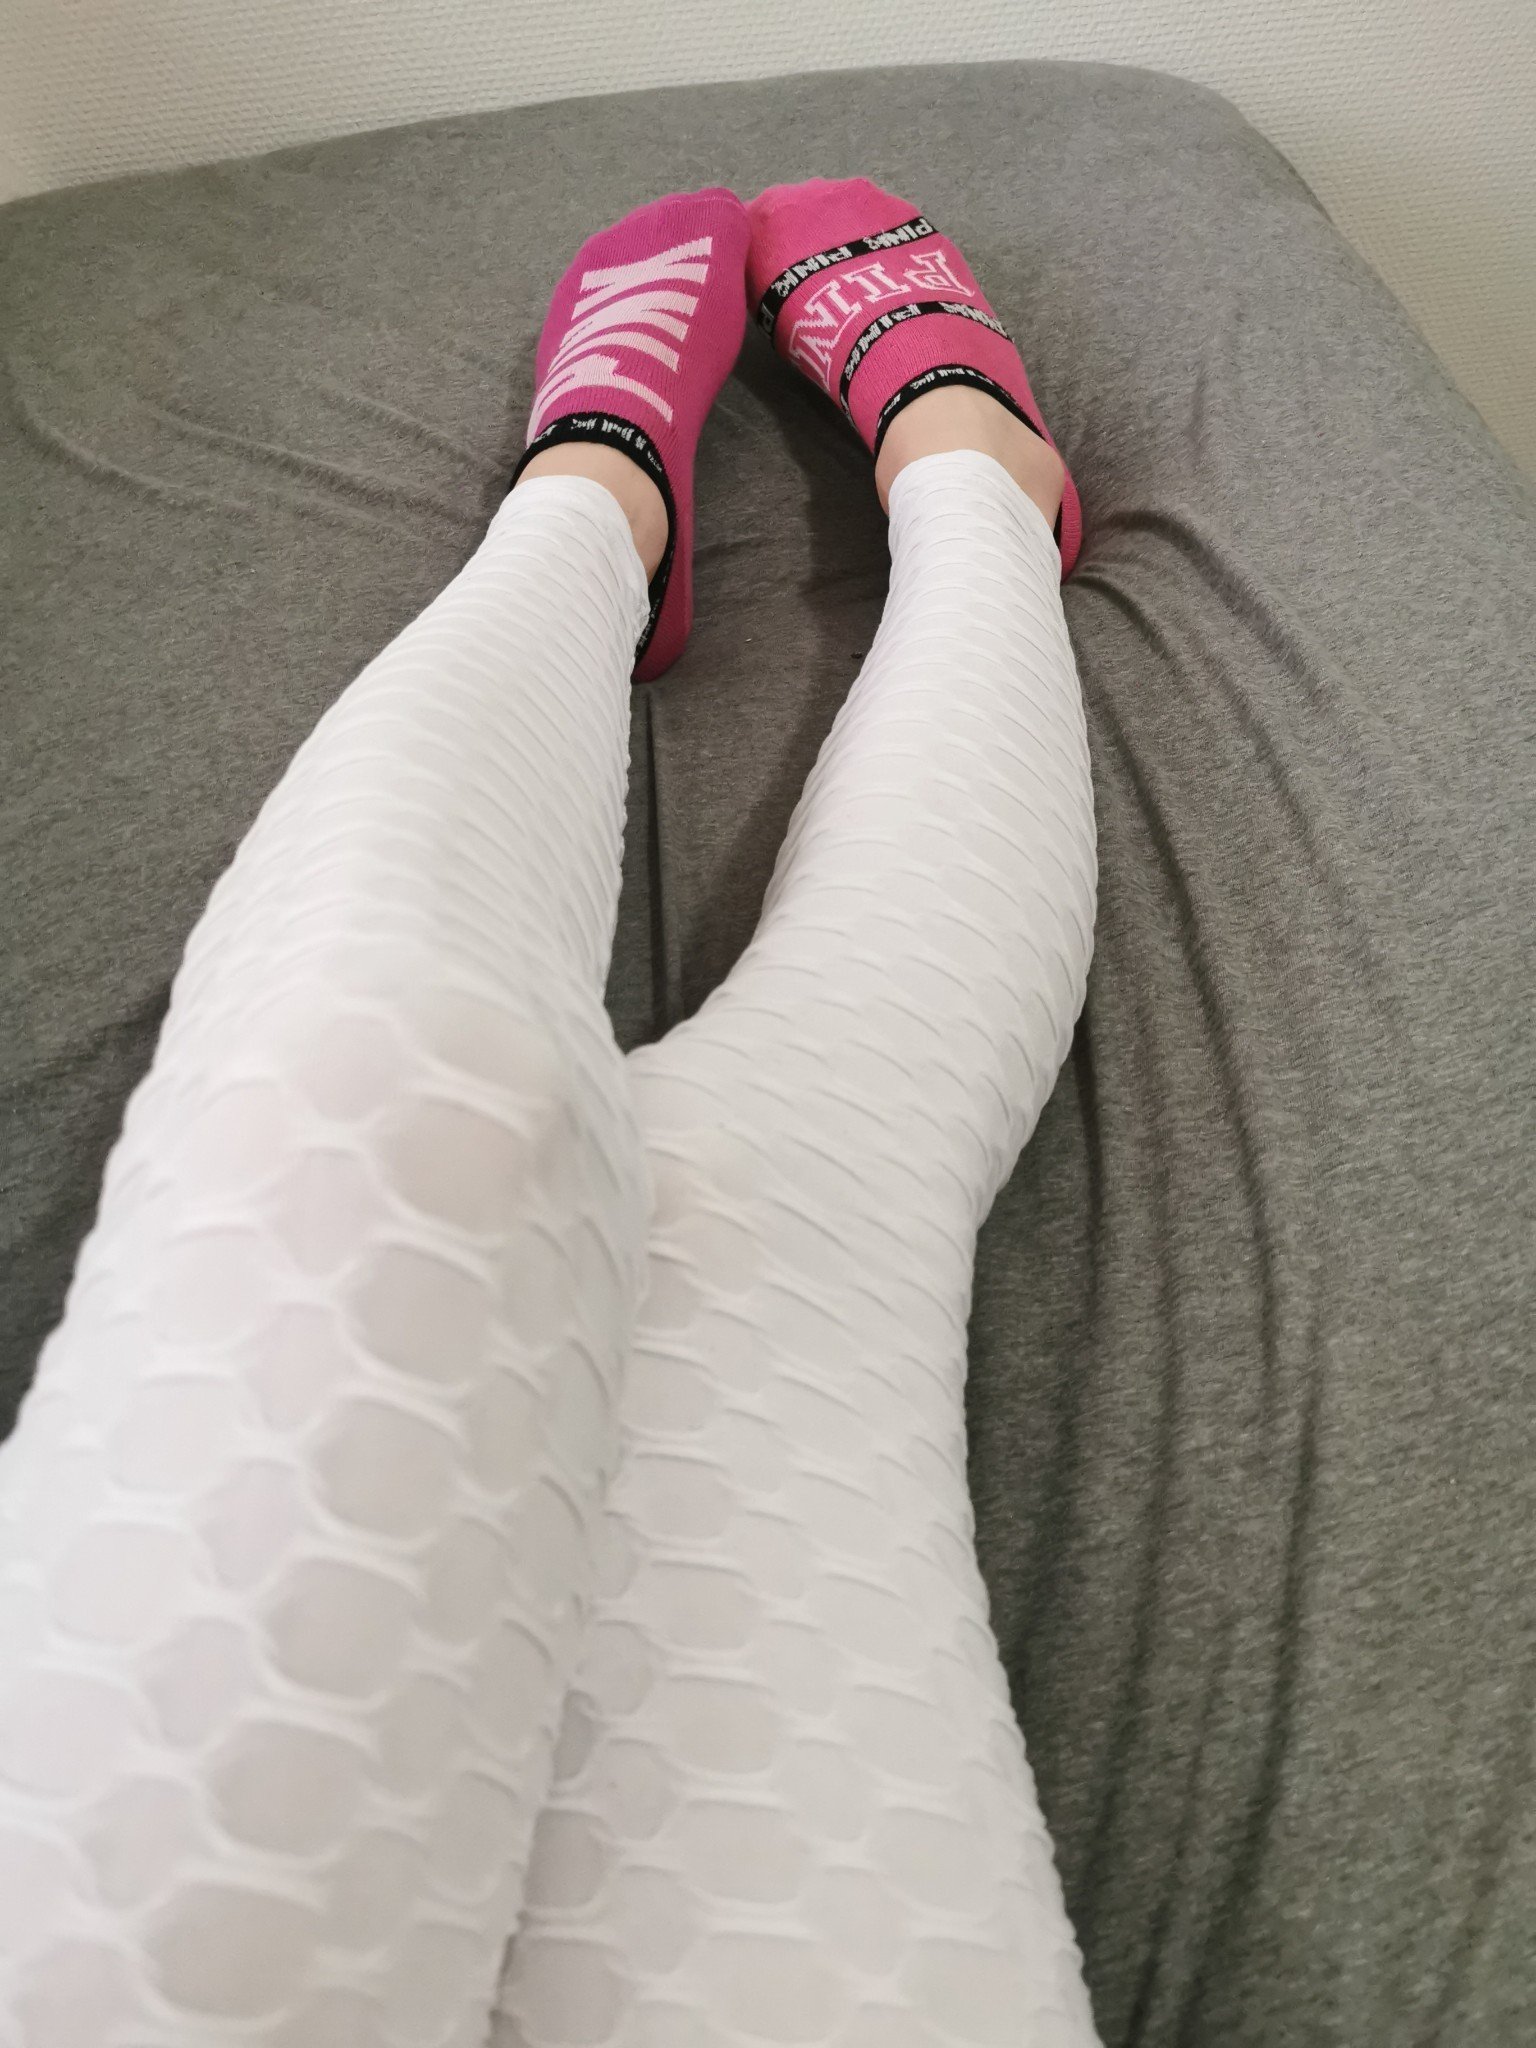 Photo by Pafyo with the username @Pafyo,  June 8, 2020 at 11:14 AM. The post is about the topic #Lovesocks